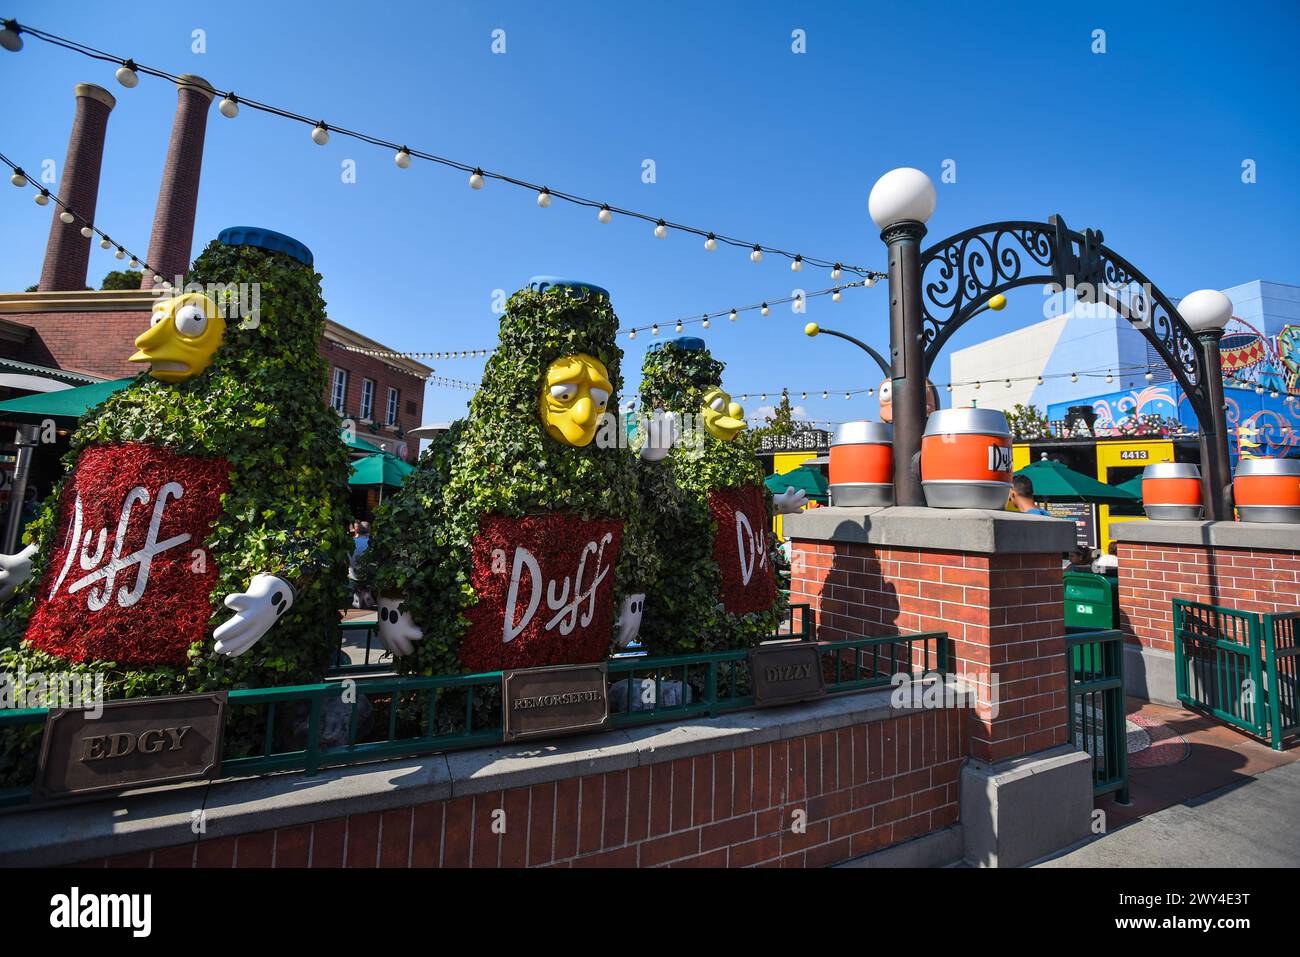 Entrance to Duff Brewery Beer Garden in Springfield, Home of the Simpsons - Universal Studios Hollywood, Los Angeles, California Stock Photo